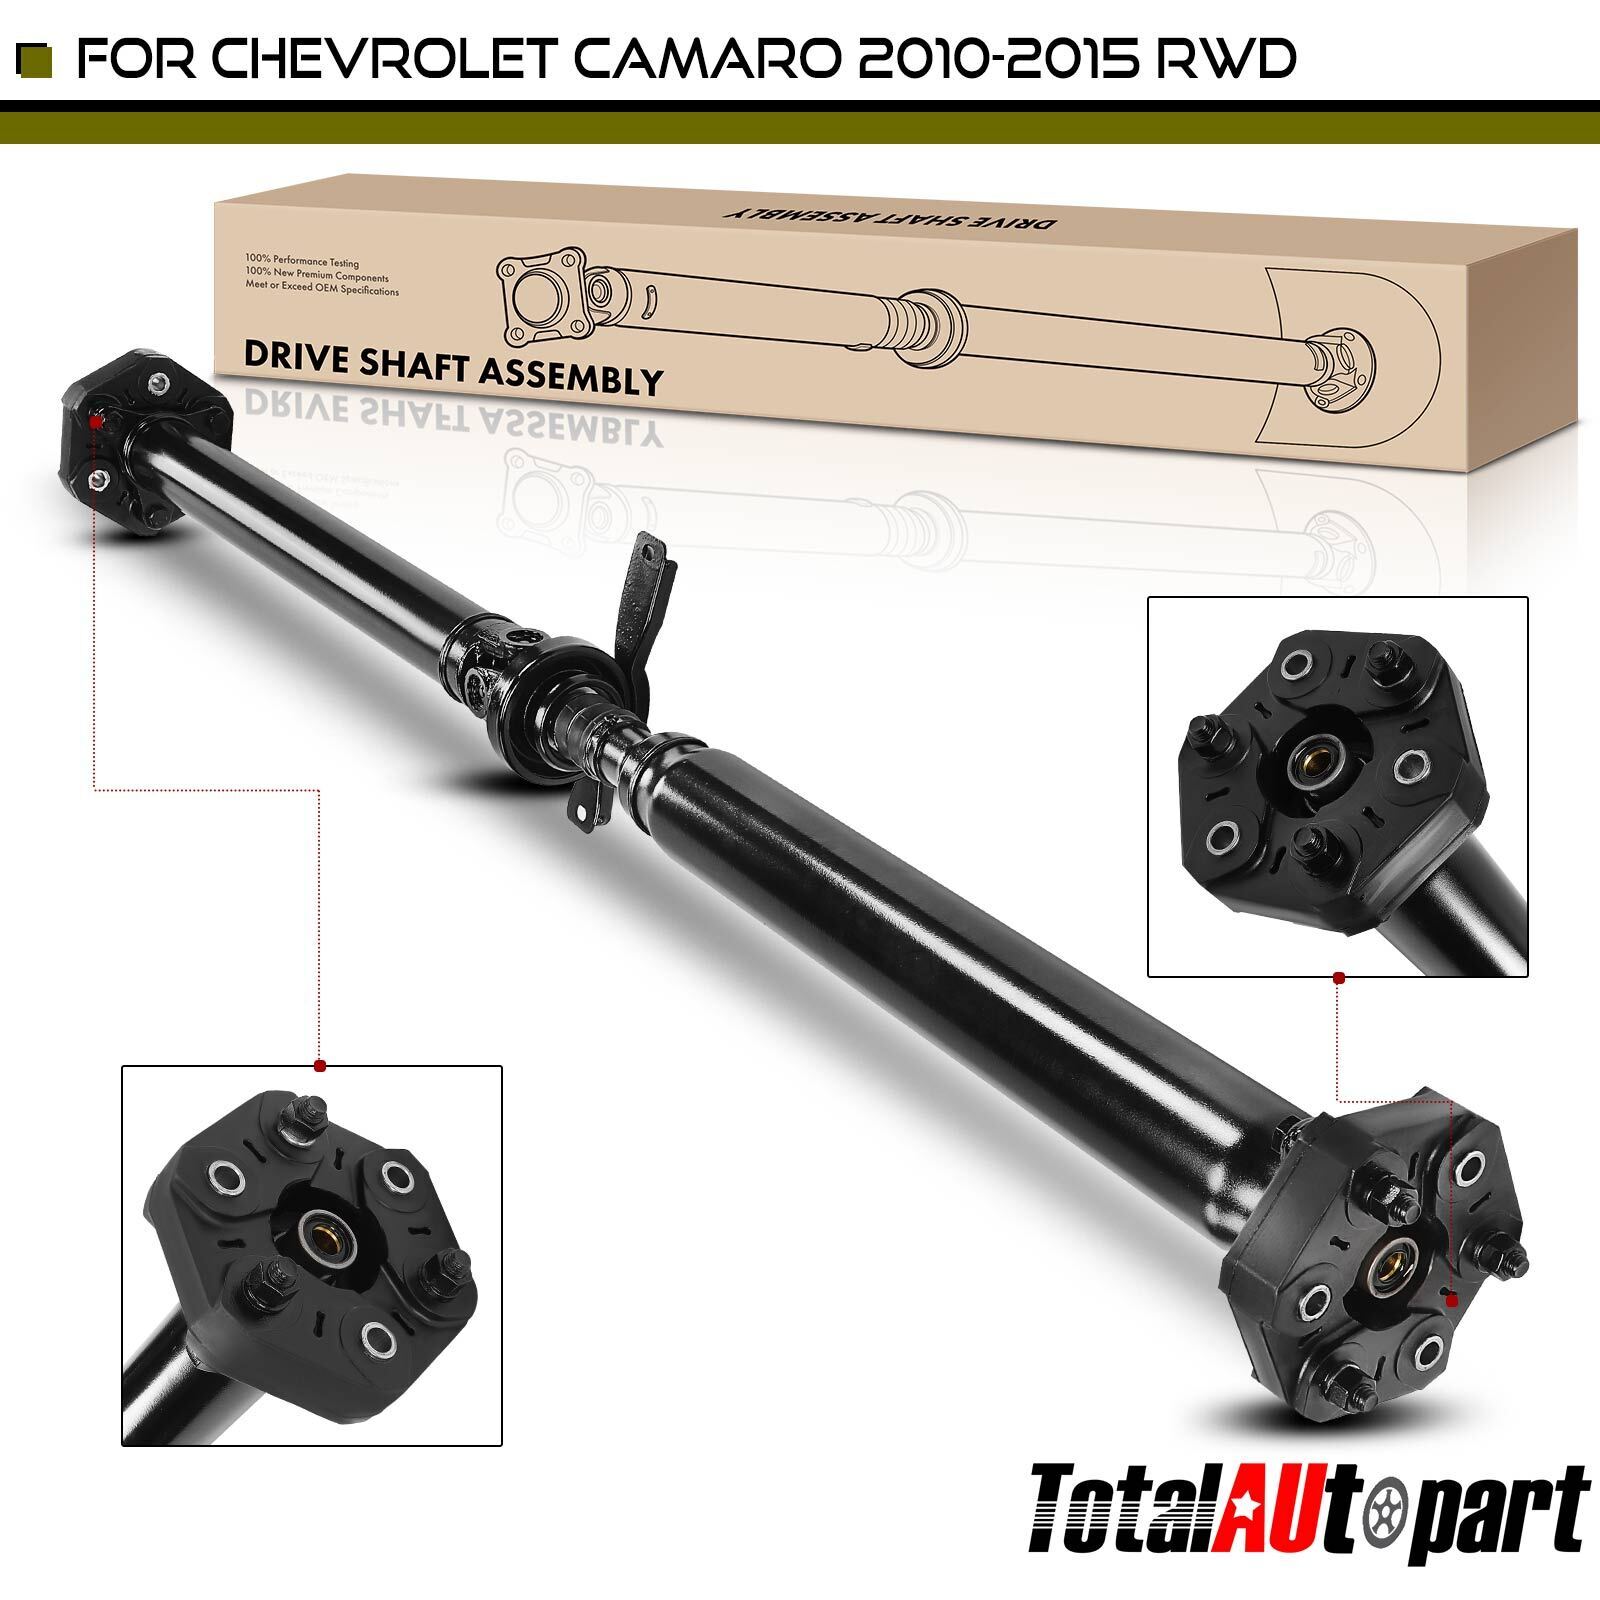 New Automatic Trans Drive Shaft Assembly for Chevrolet Camaro 2010-2015 RWD Rear